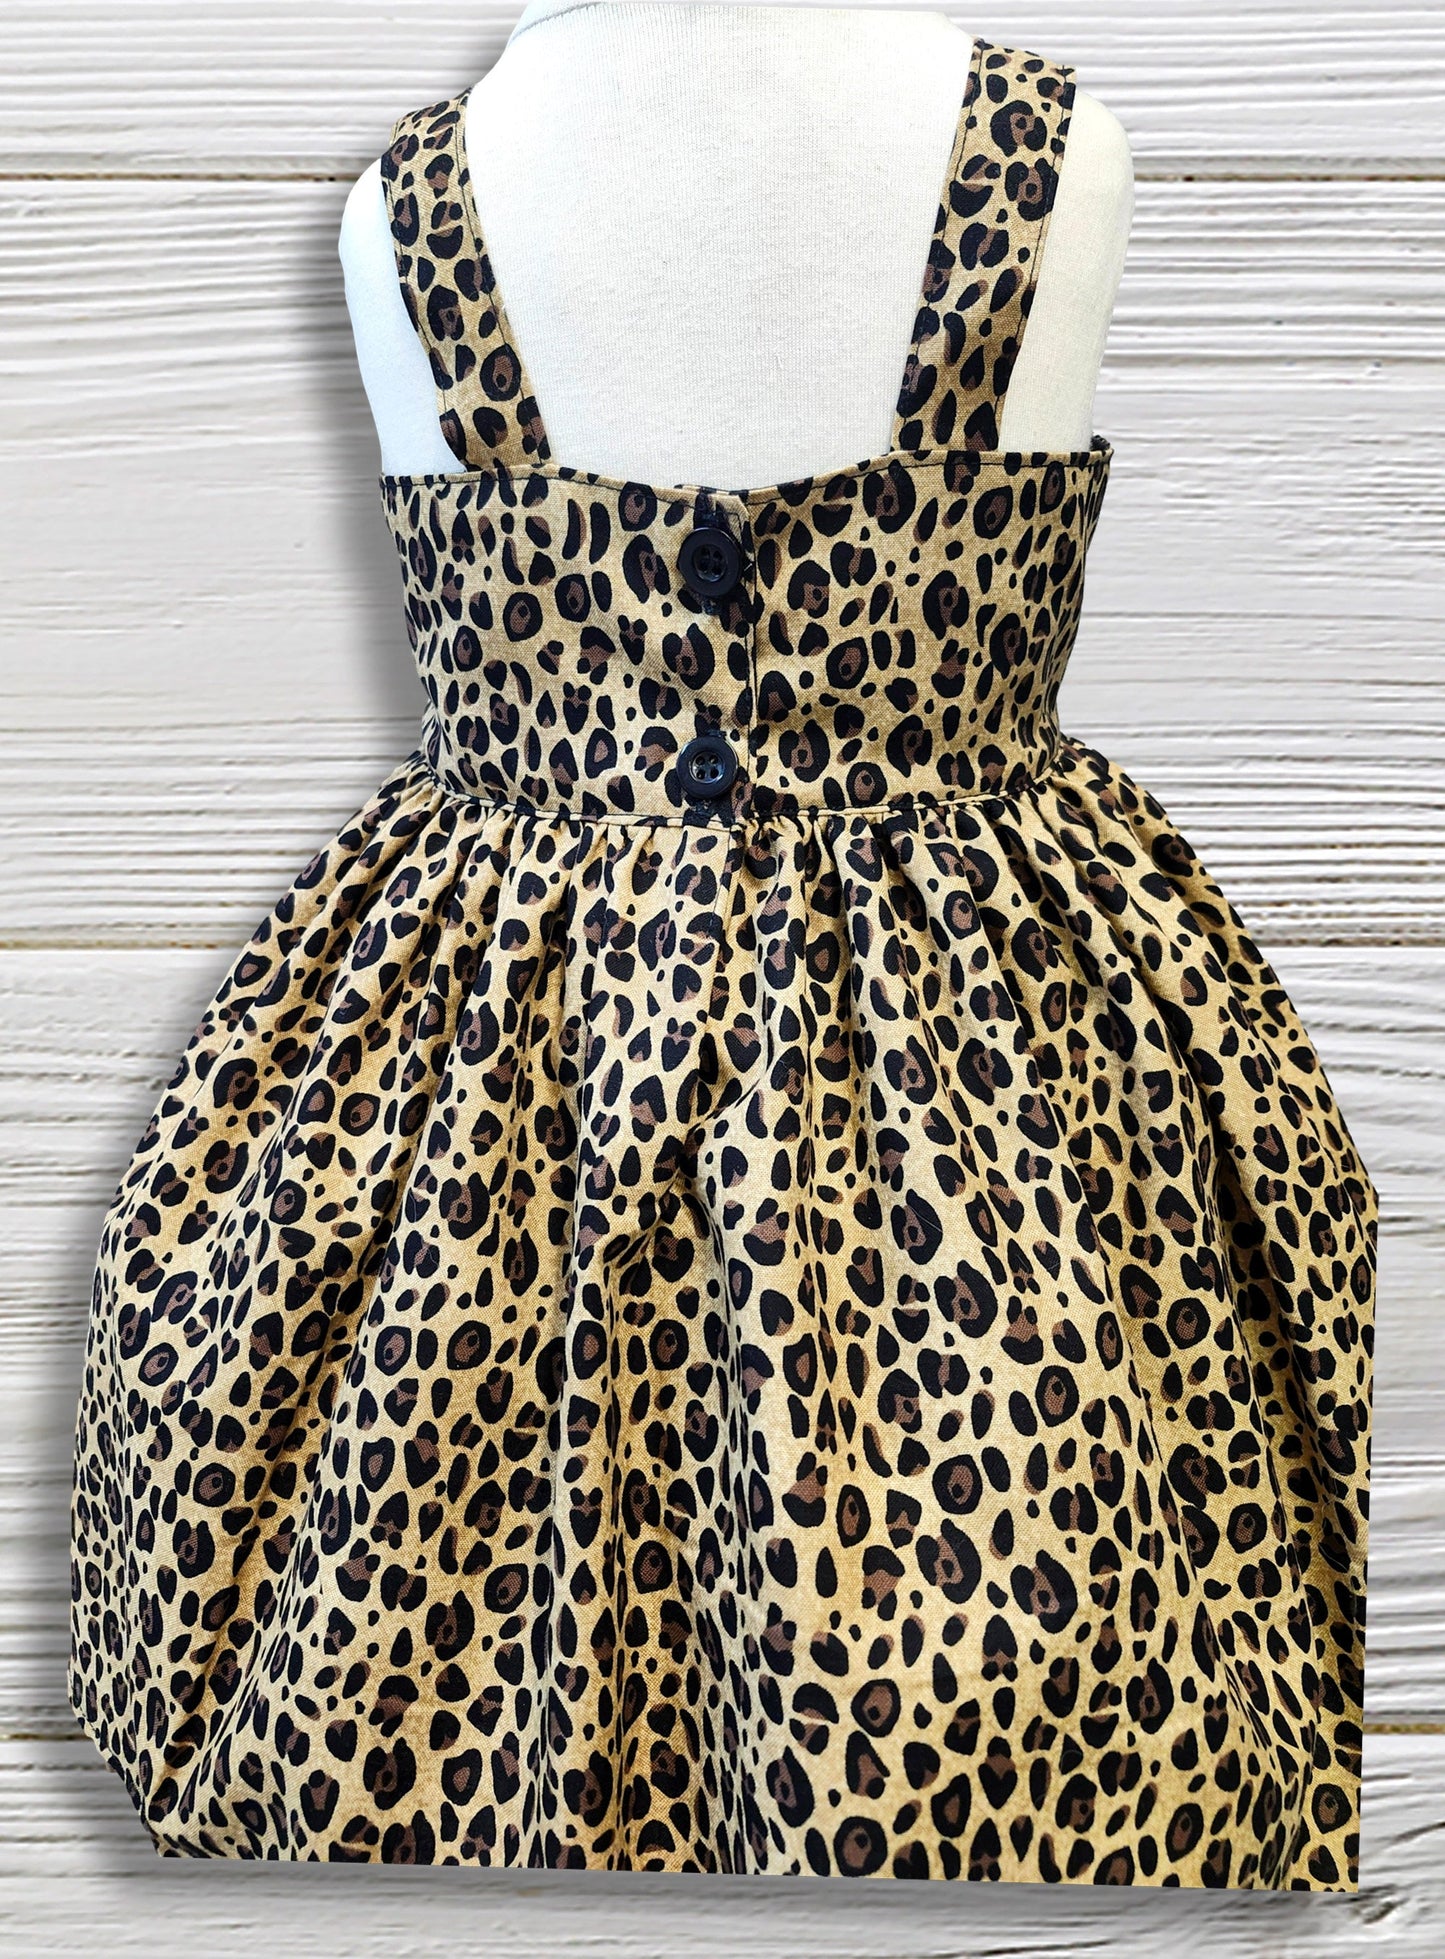 Cheetah dress for girls, Leopard mouse character girls dress, Baby Cheetah dress,  Safari dress, Birthday safari embroider mouse dress